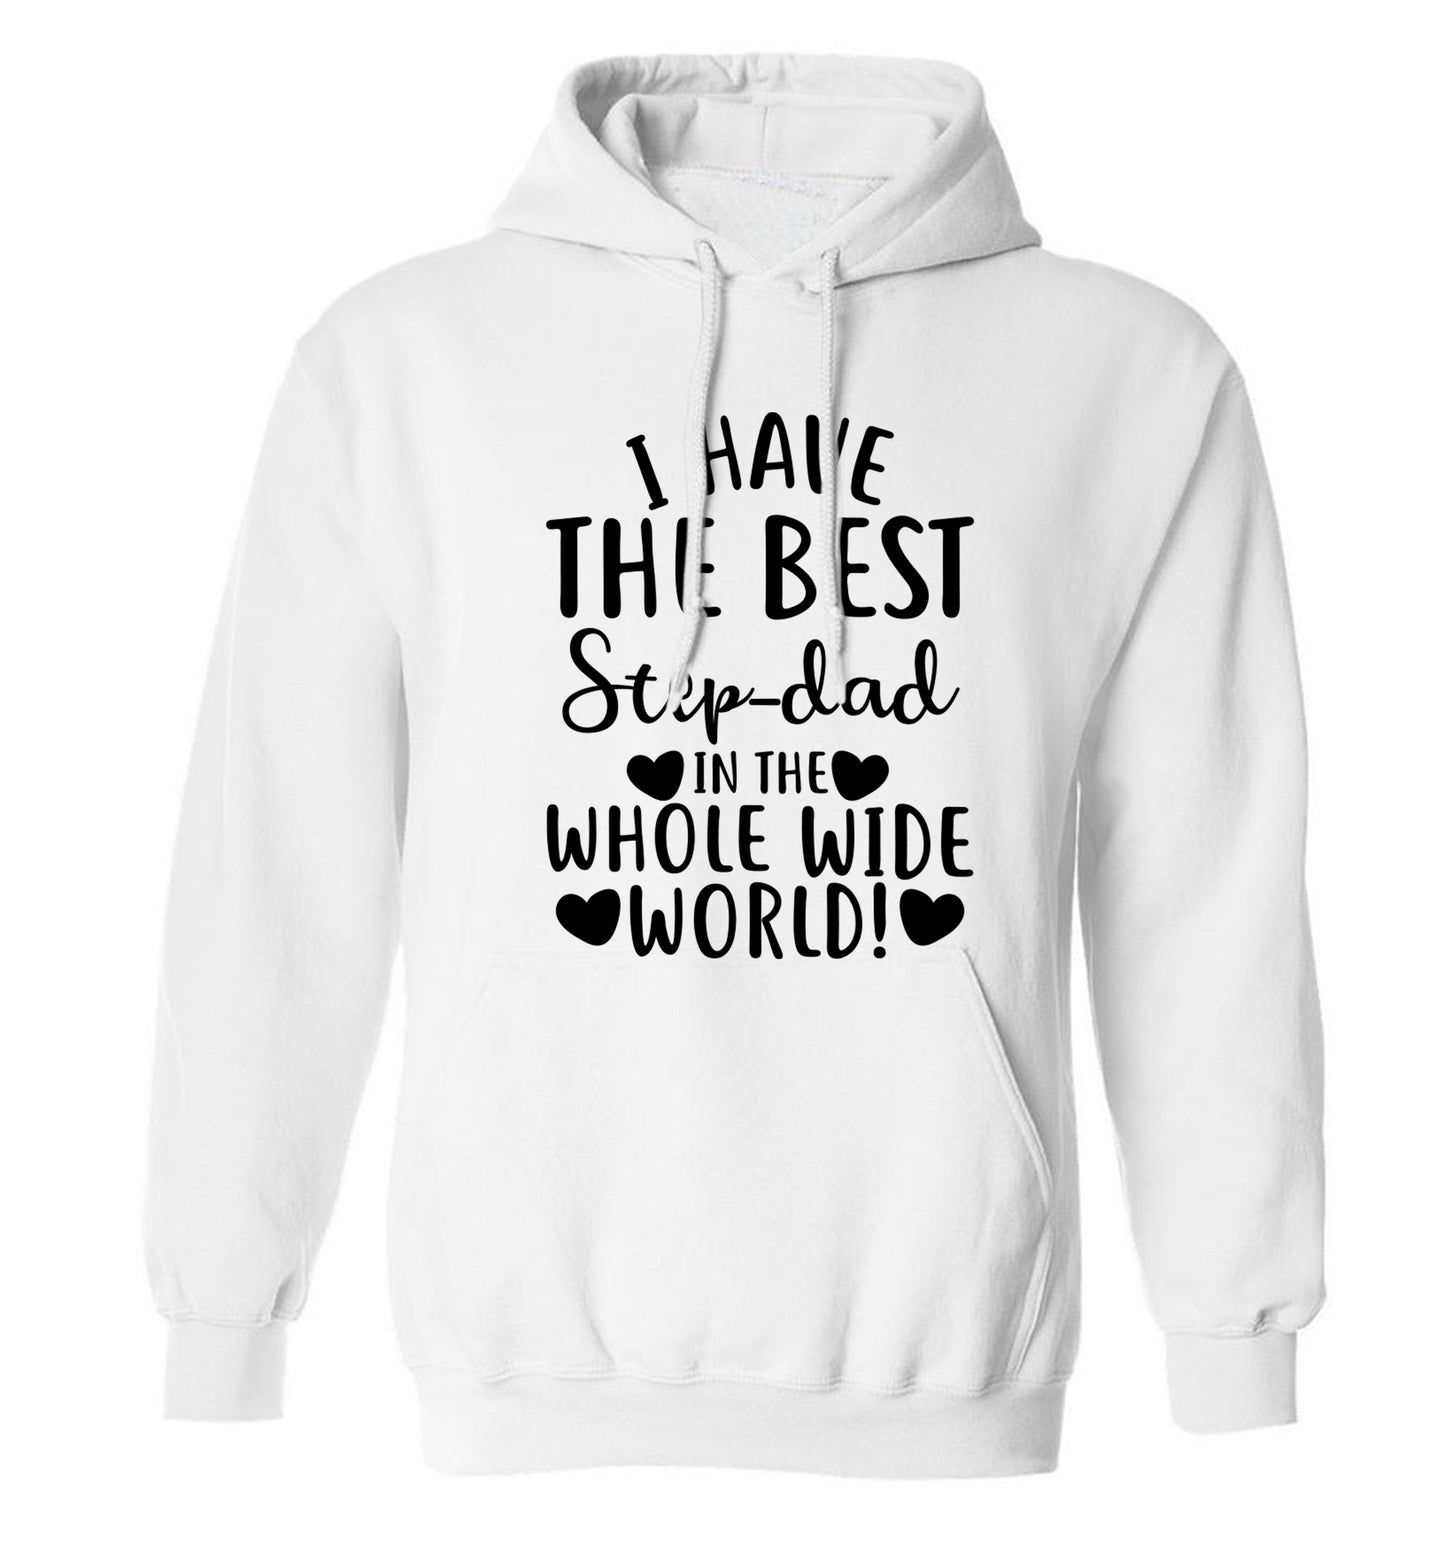 I have the best step-dad in the whole wide world! adults unisex white hoodie 2XL